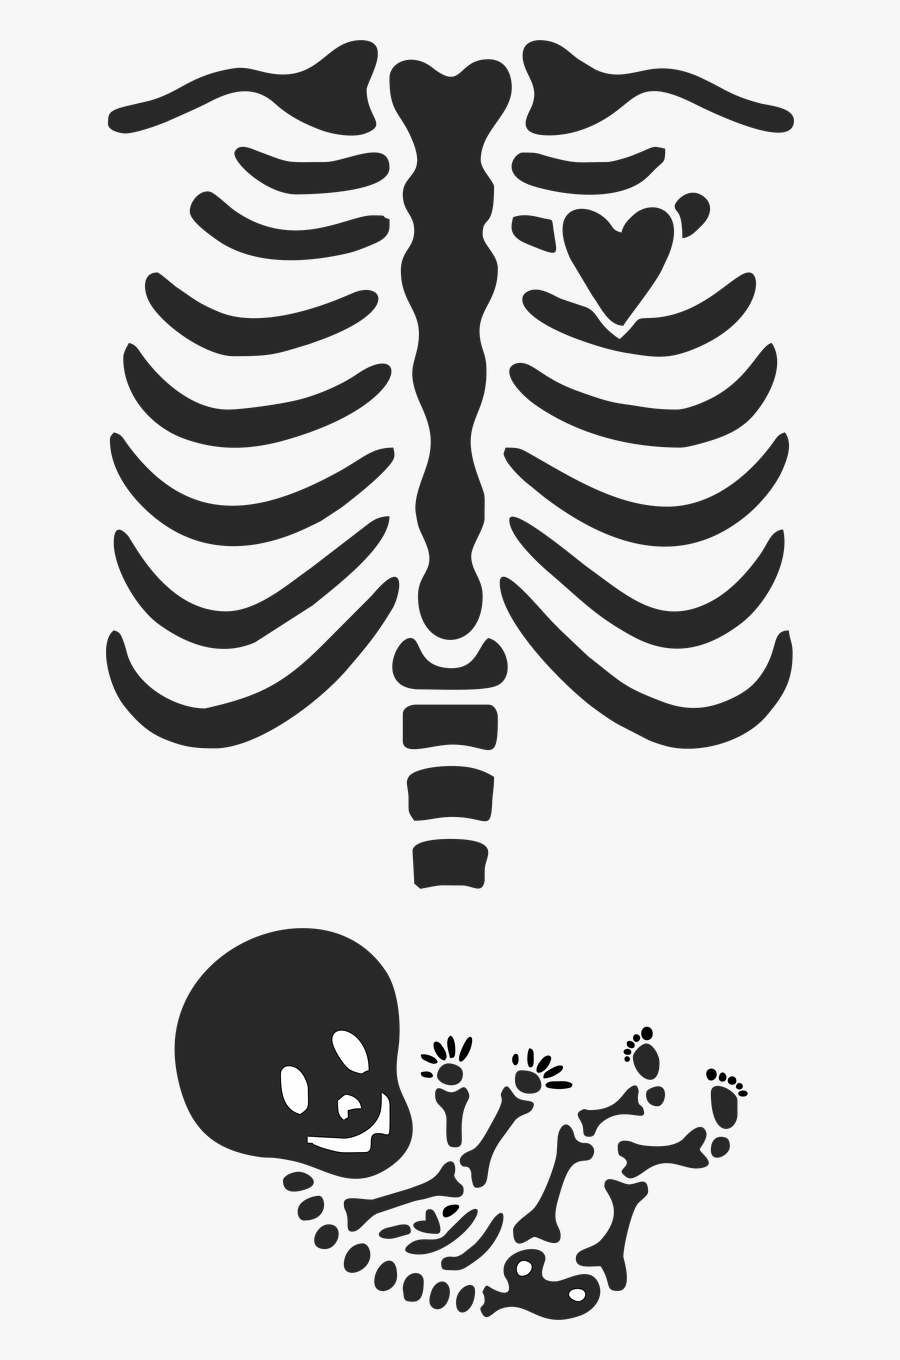 Download 19+ Skeleton Svg File Free Background Free SVG files | Silhouette and Cricut Cutting Files